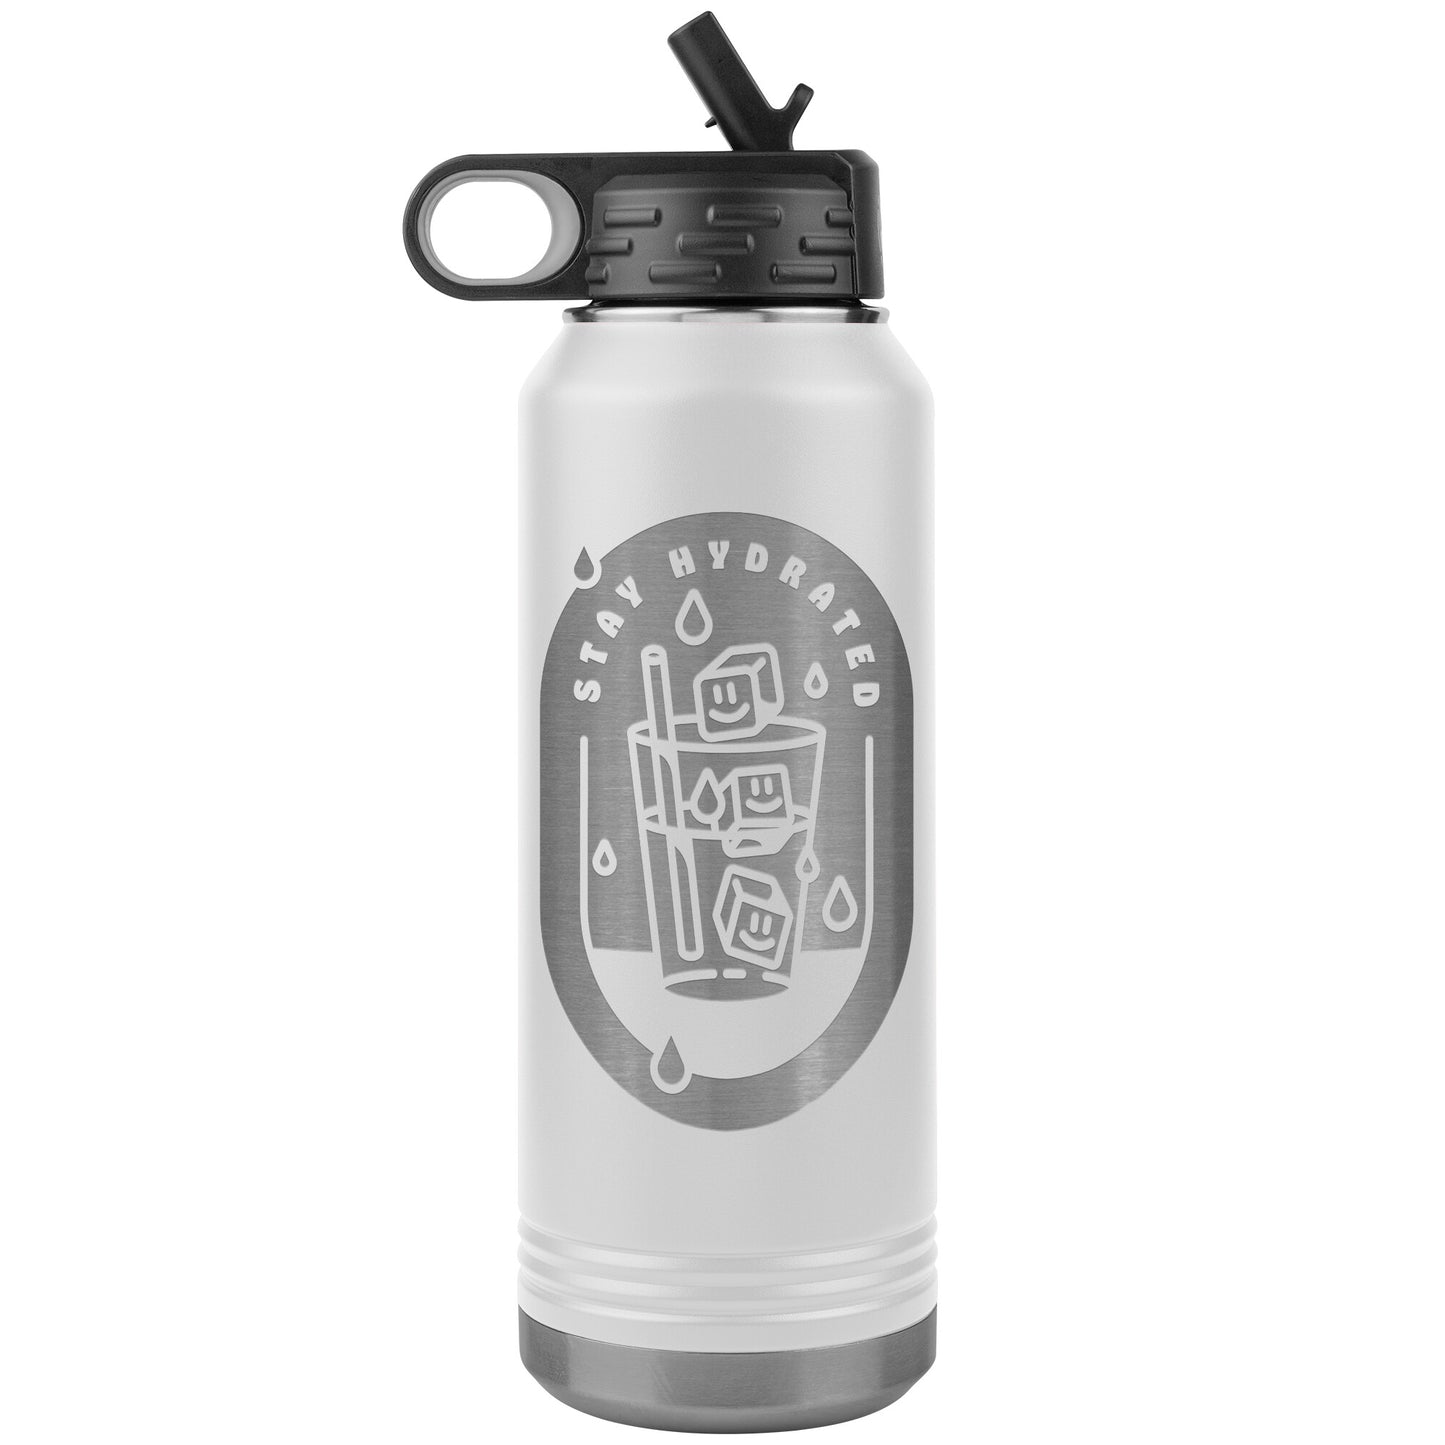 Stay Hydrated 01 - 32oz Insulated Water Bottle